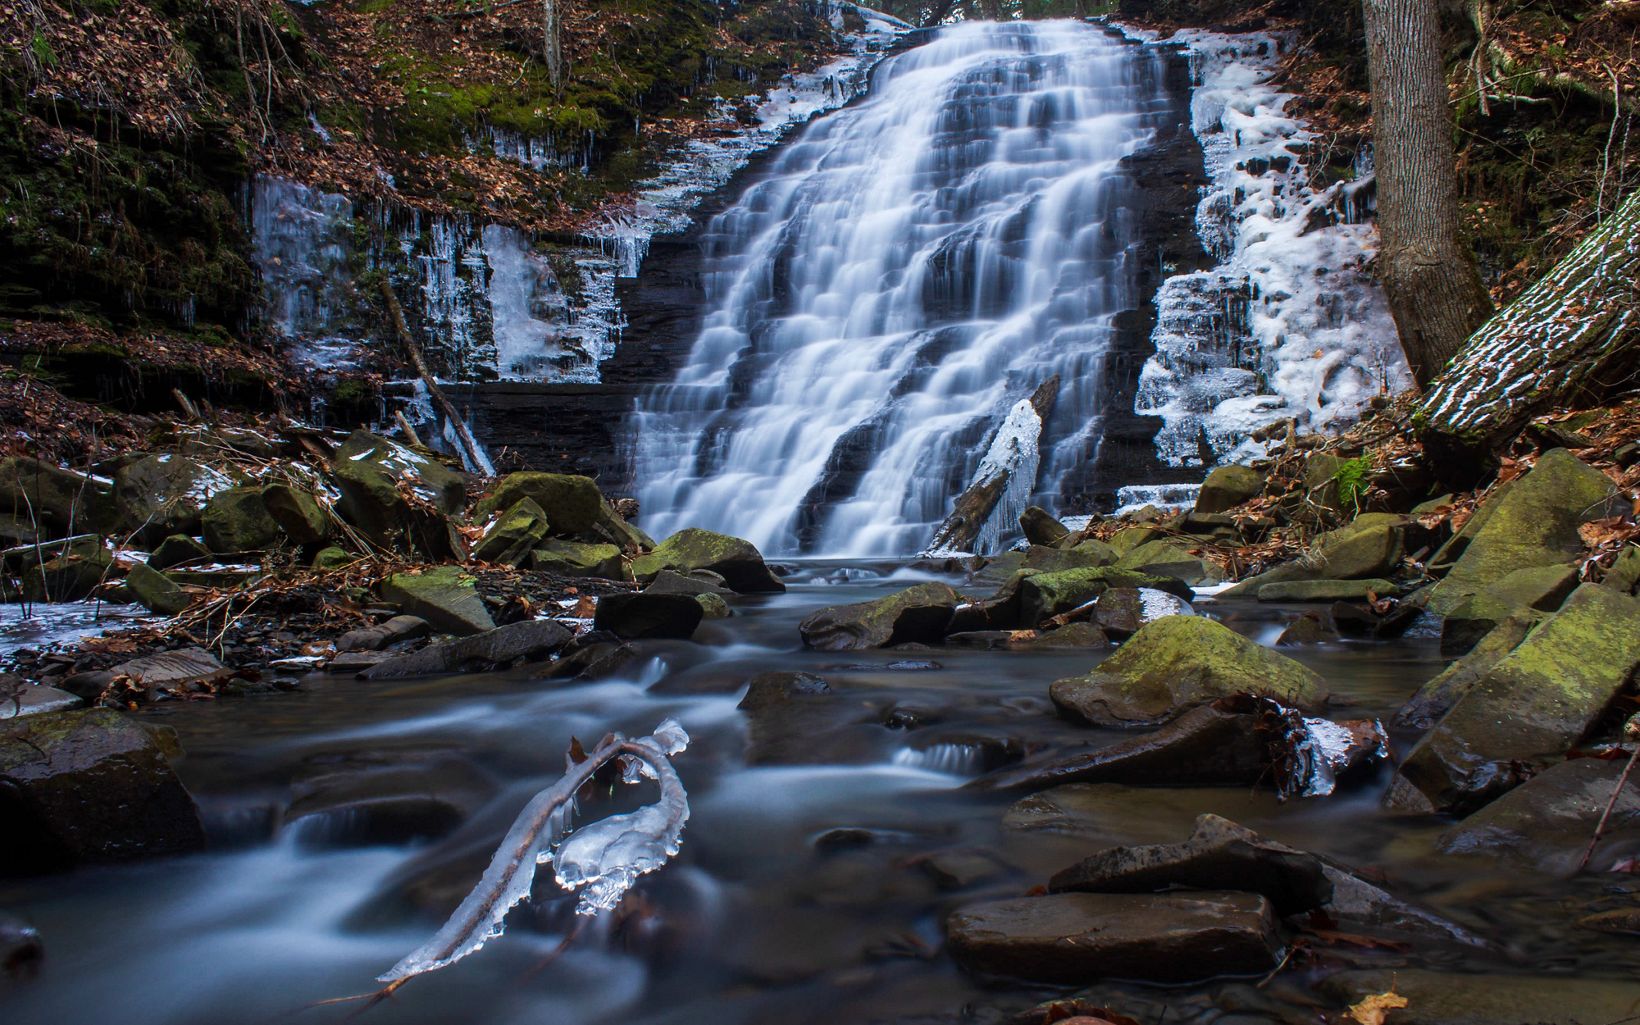 View of waterfall and creek with a light dusting of snow on surrounding rocks.